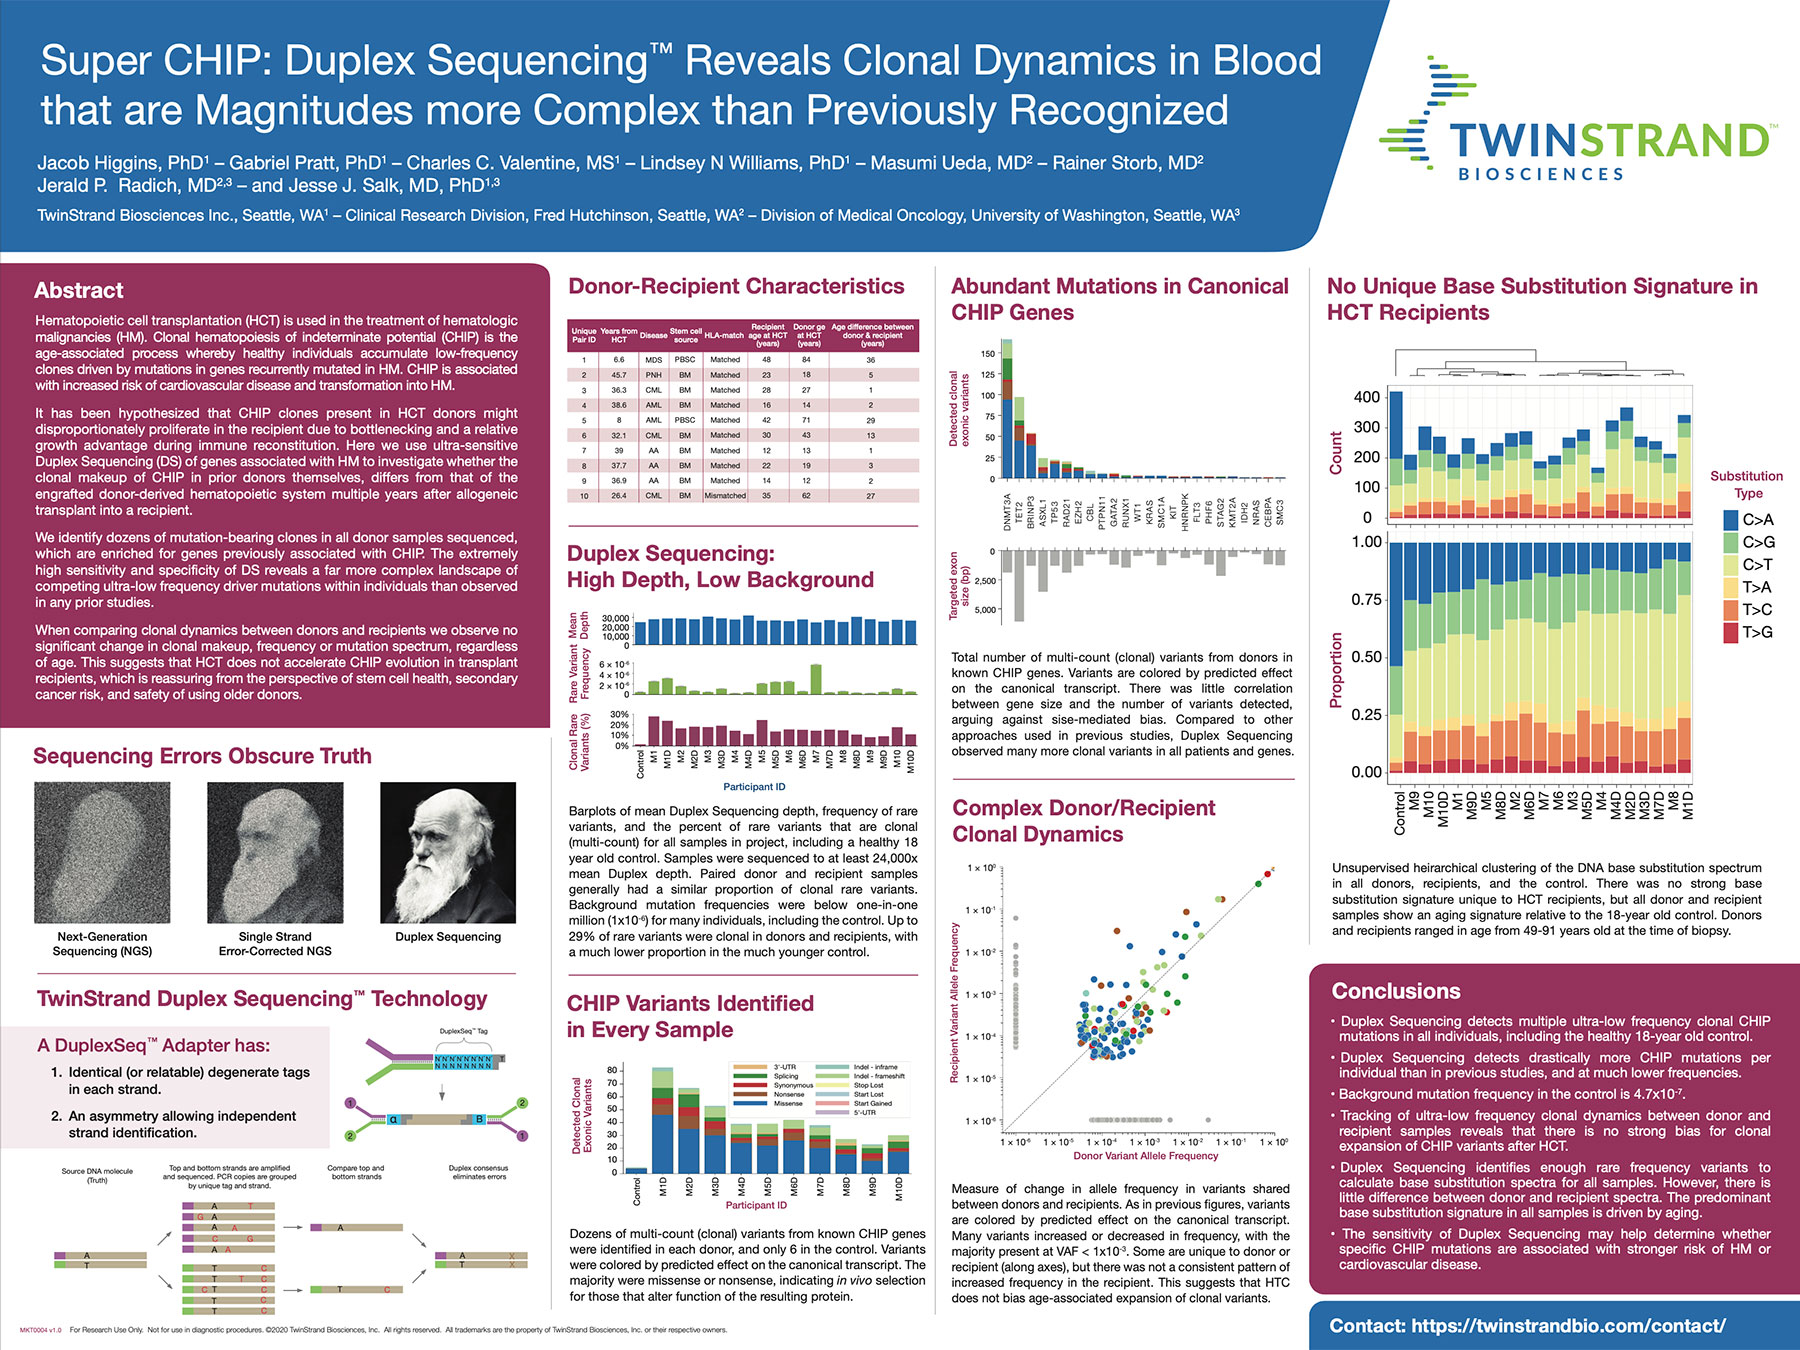 Super CHIP: Duplex Sequencing Reveals Clonal Dynamics in Blood that are Magnitudes more Complex than Previously Recognized